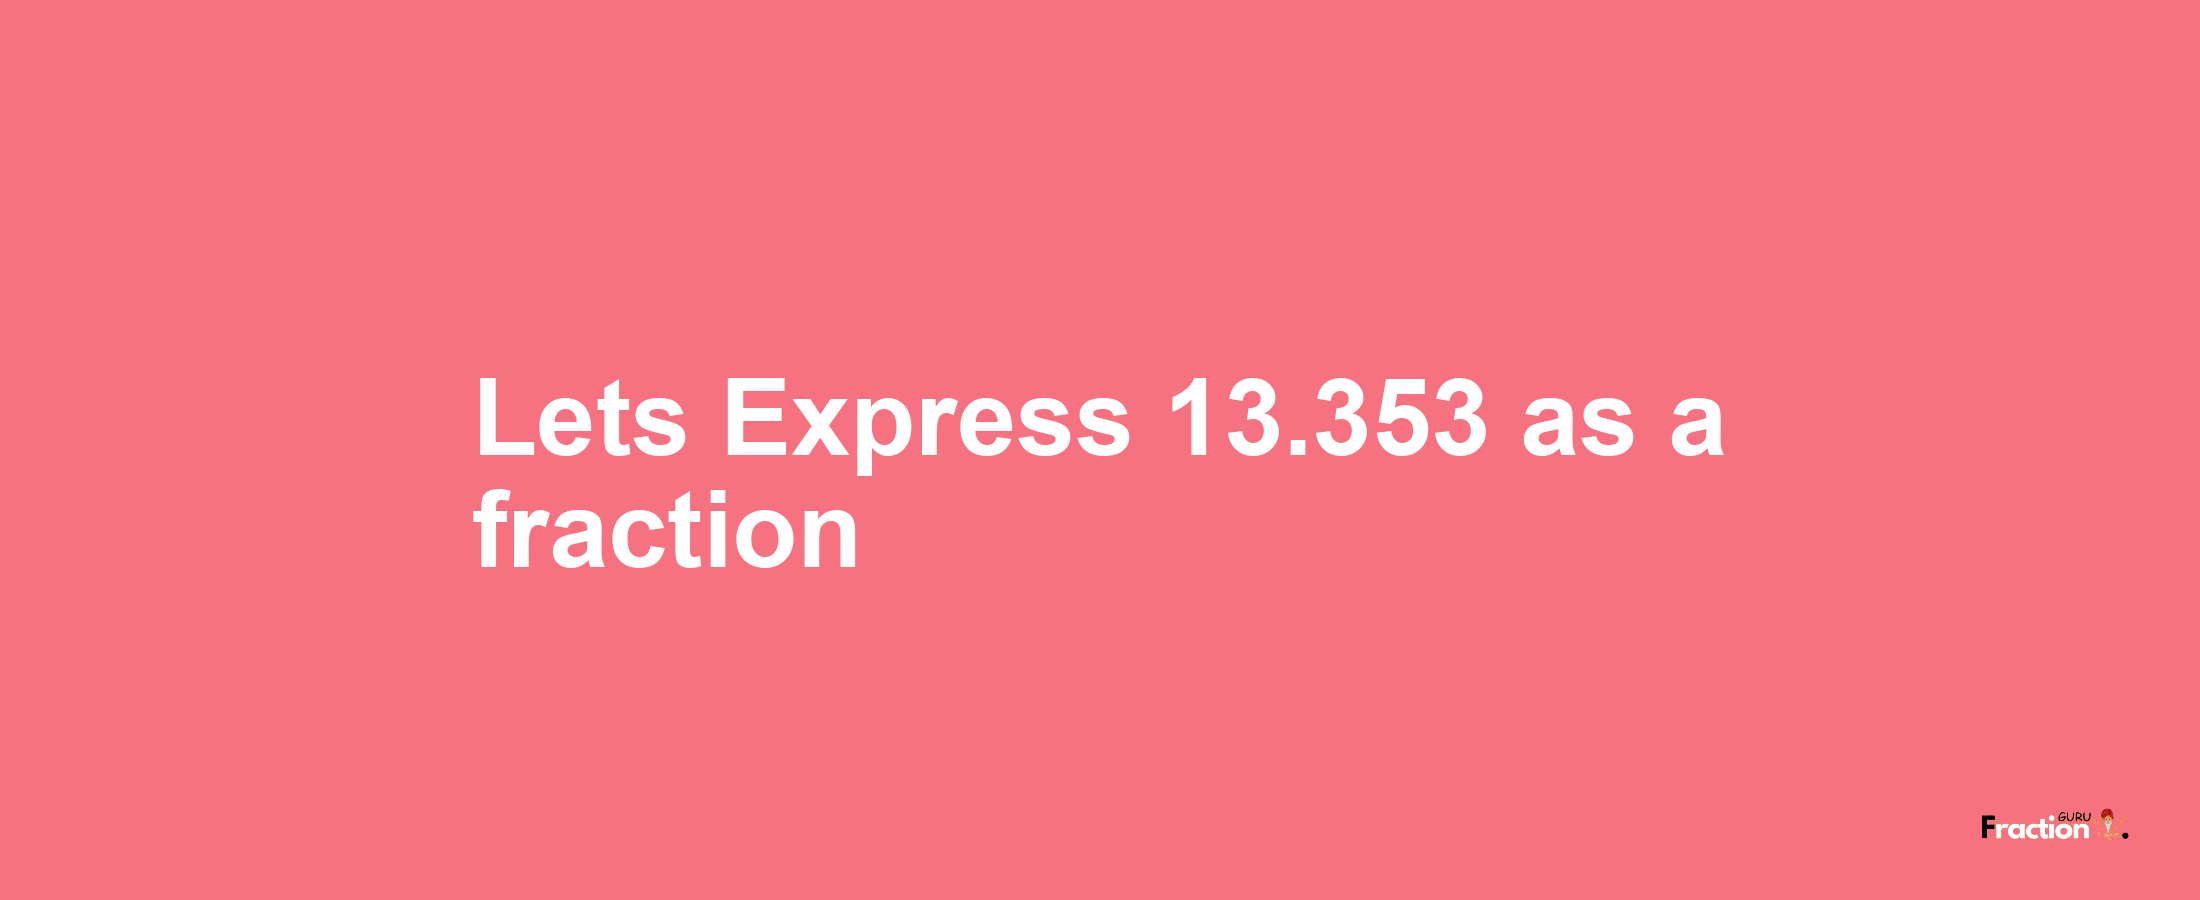 Lets Express 13.353 as afraction